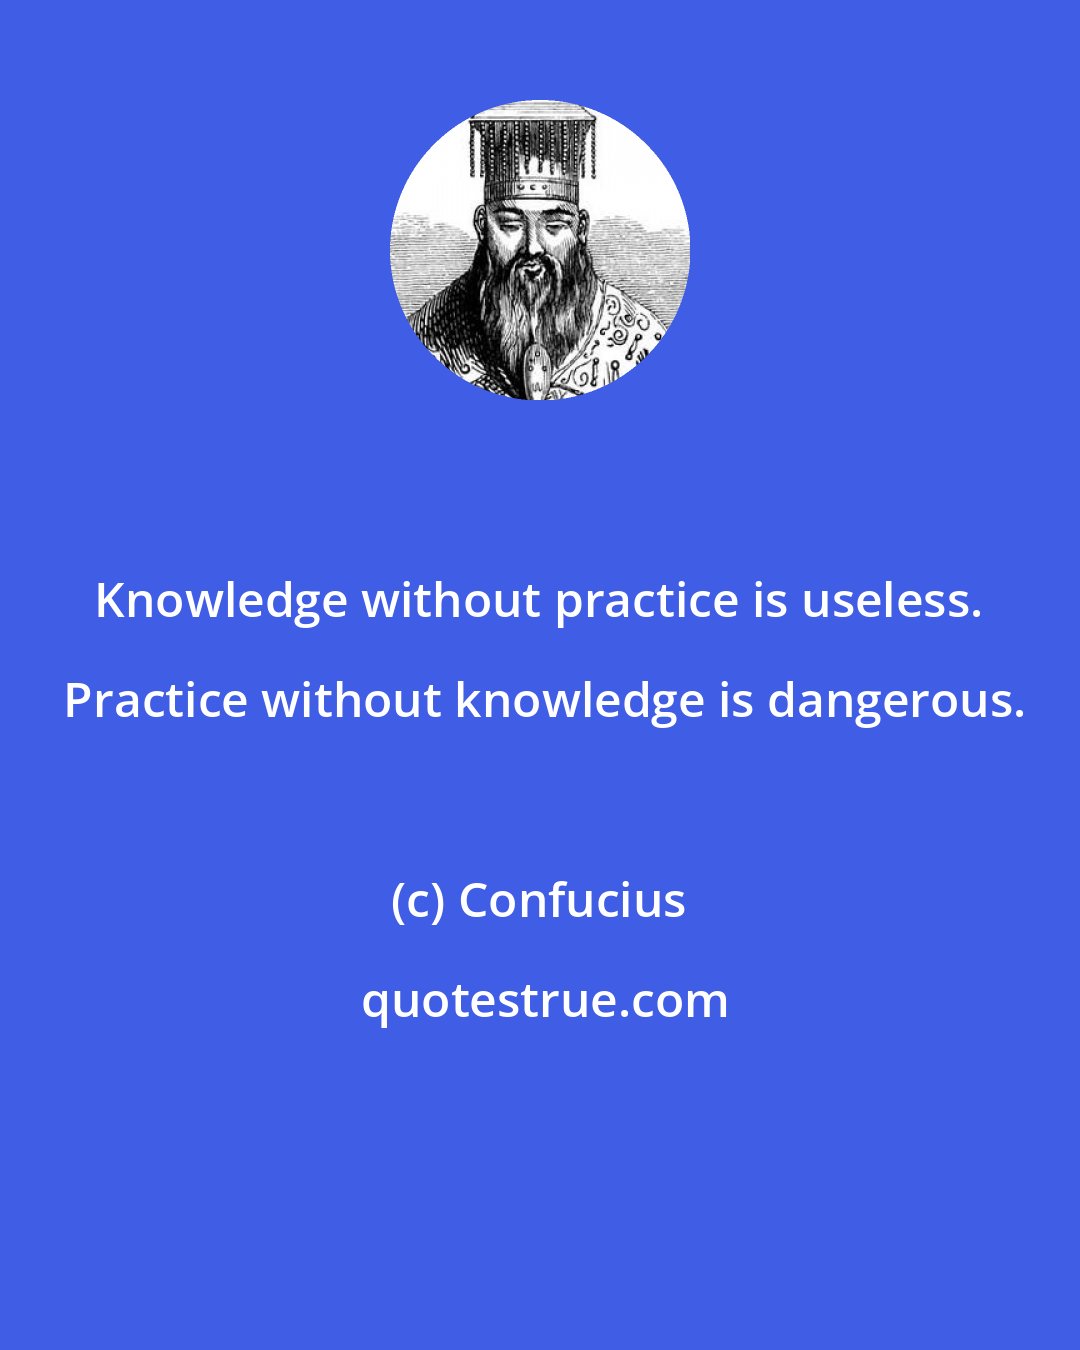 Confucius: Knowledge without practice is useless.  Practice without knowledge is dangerous.